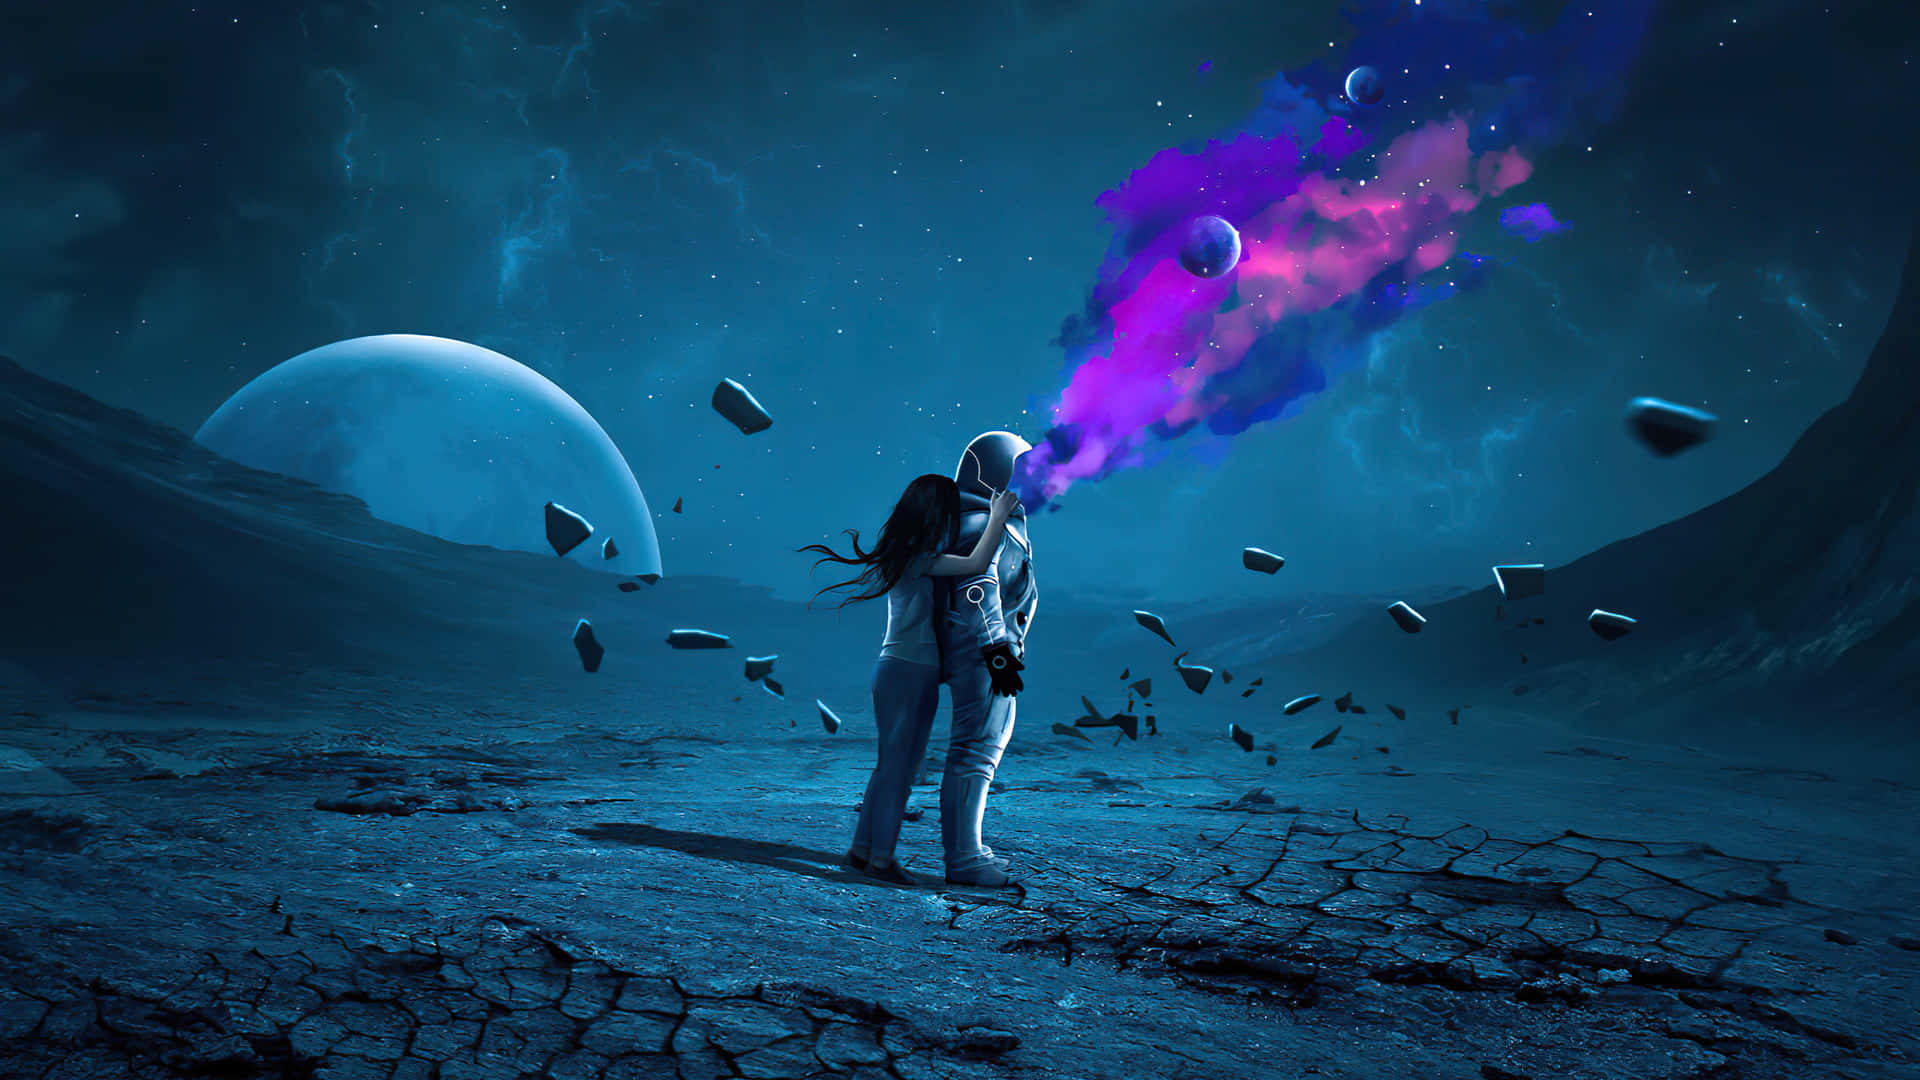 Neon Astronaut On A Planet Wallpaper